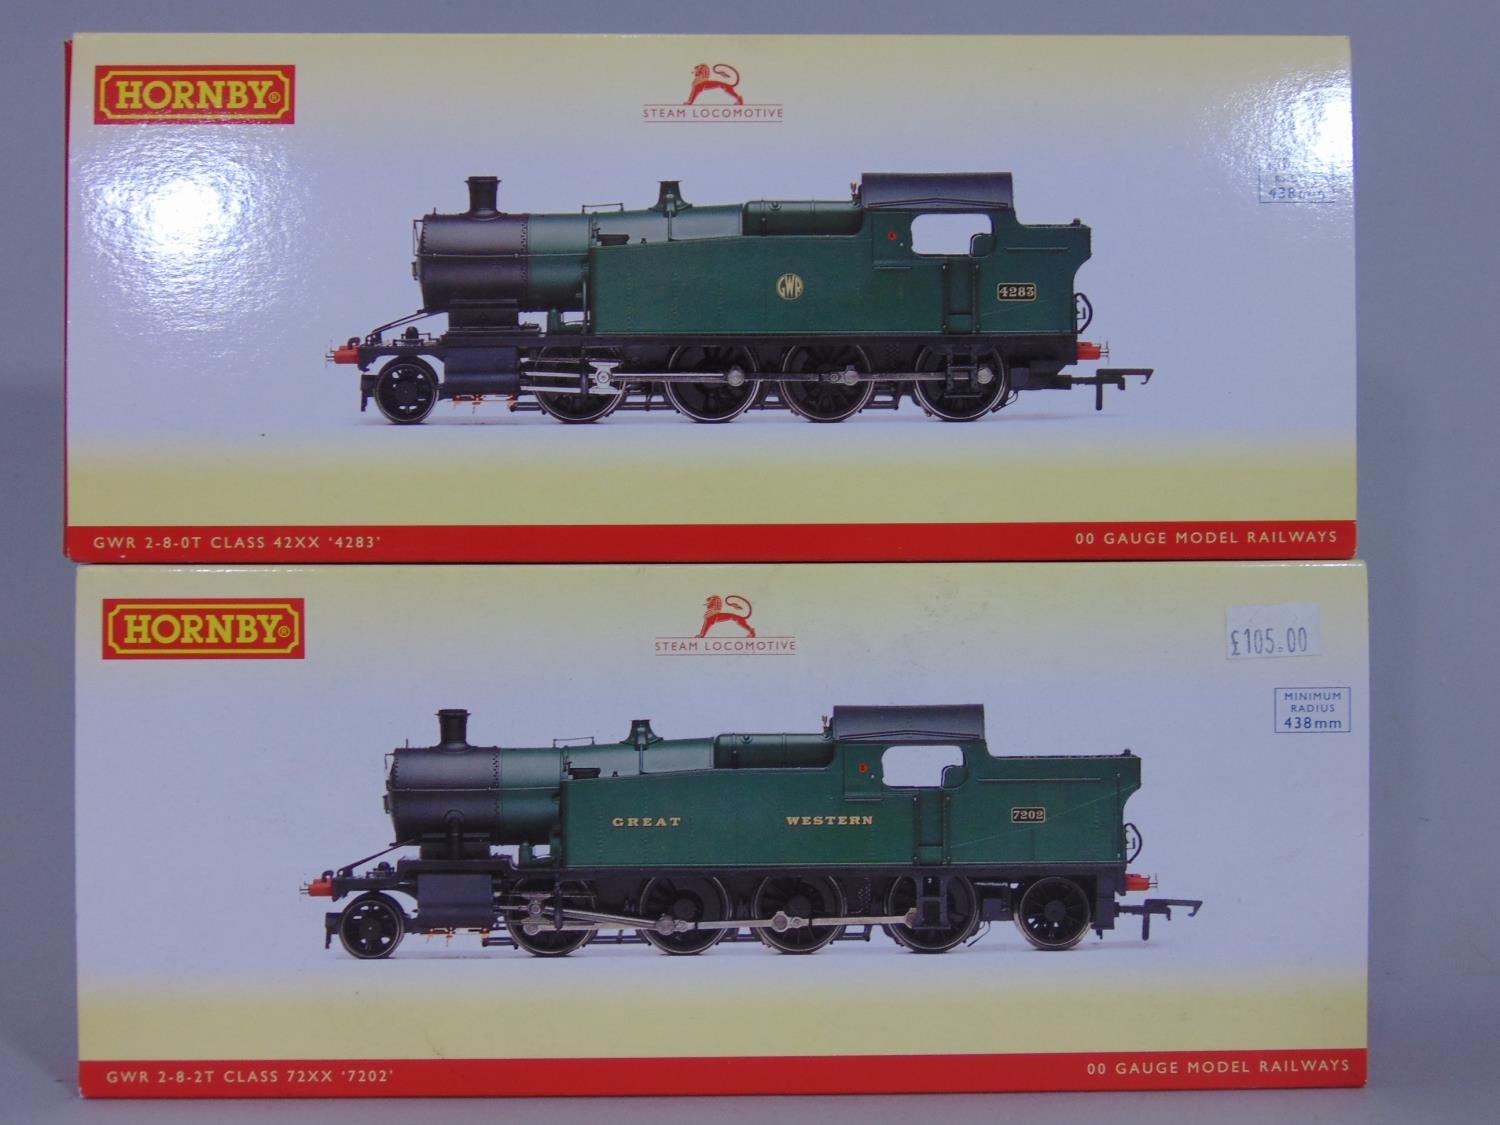 2 Hornby boxed Locomotives: R3127 GWR 2-8-2T Class 72XX 7202 and R3123 GWR 2-8-0T Class 42XX 4283,